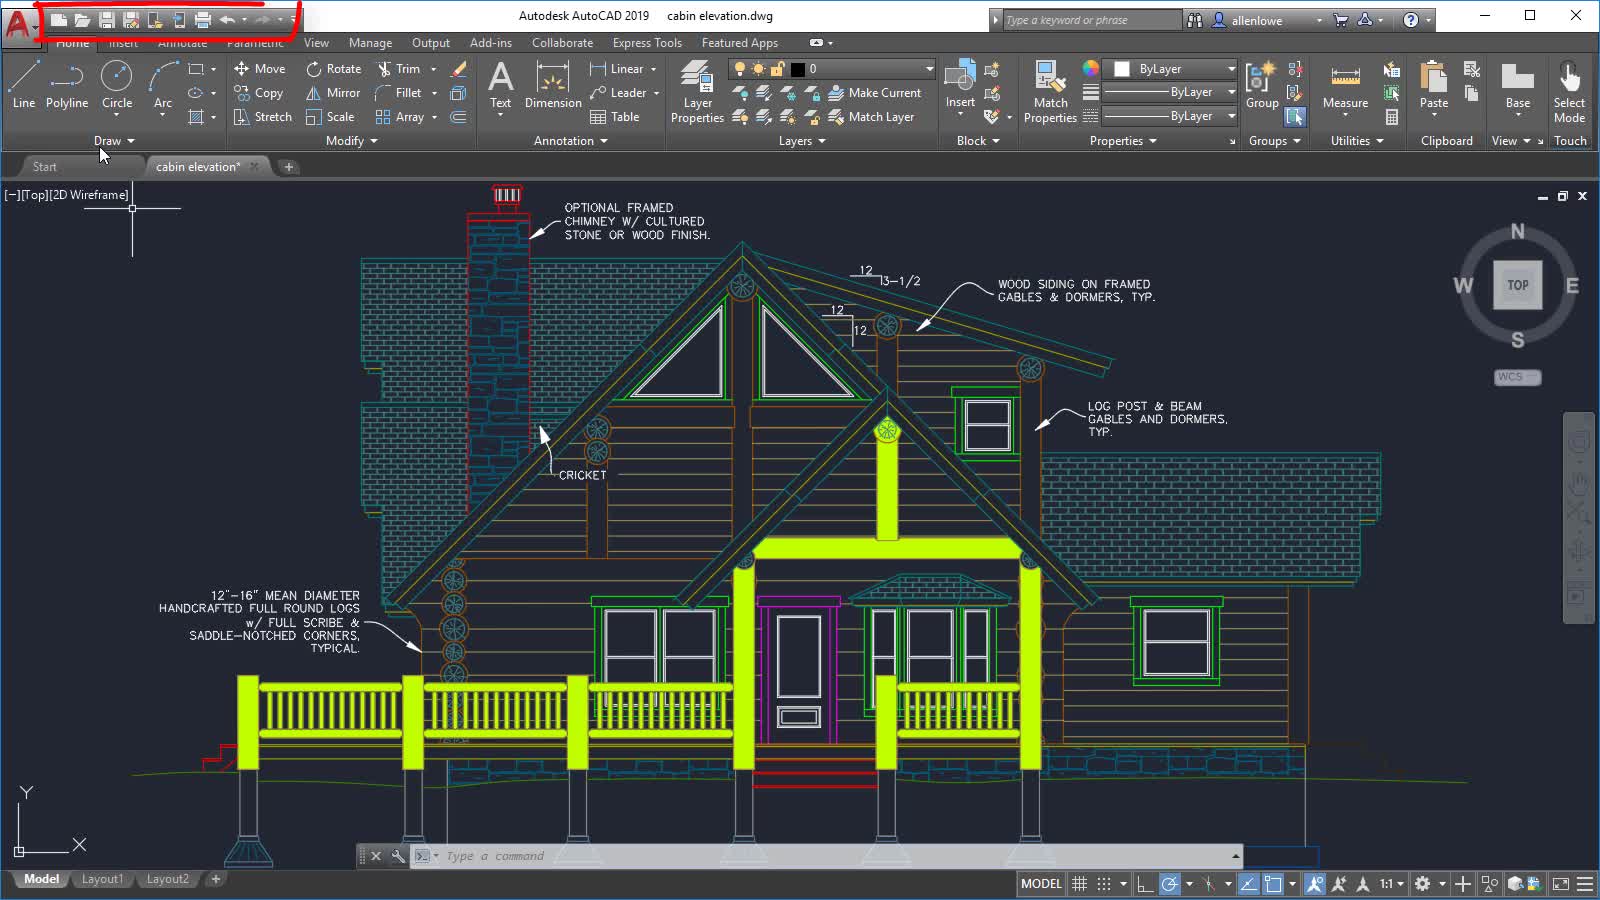 autocad for mac home use